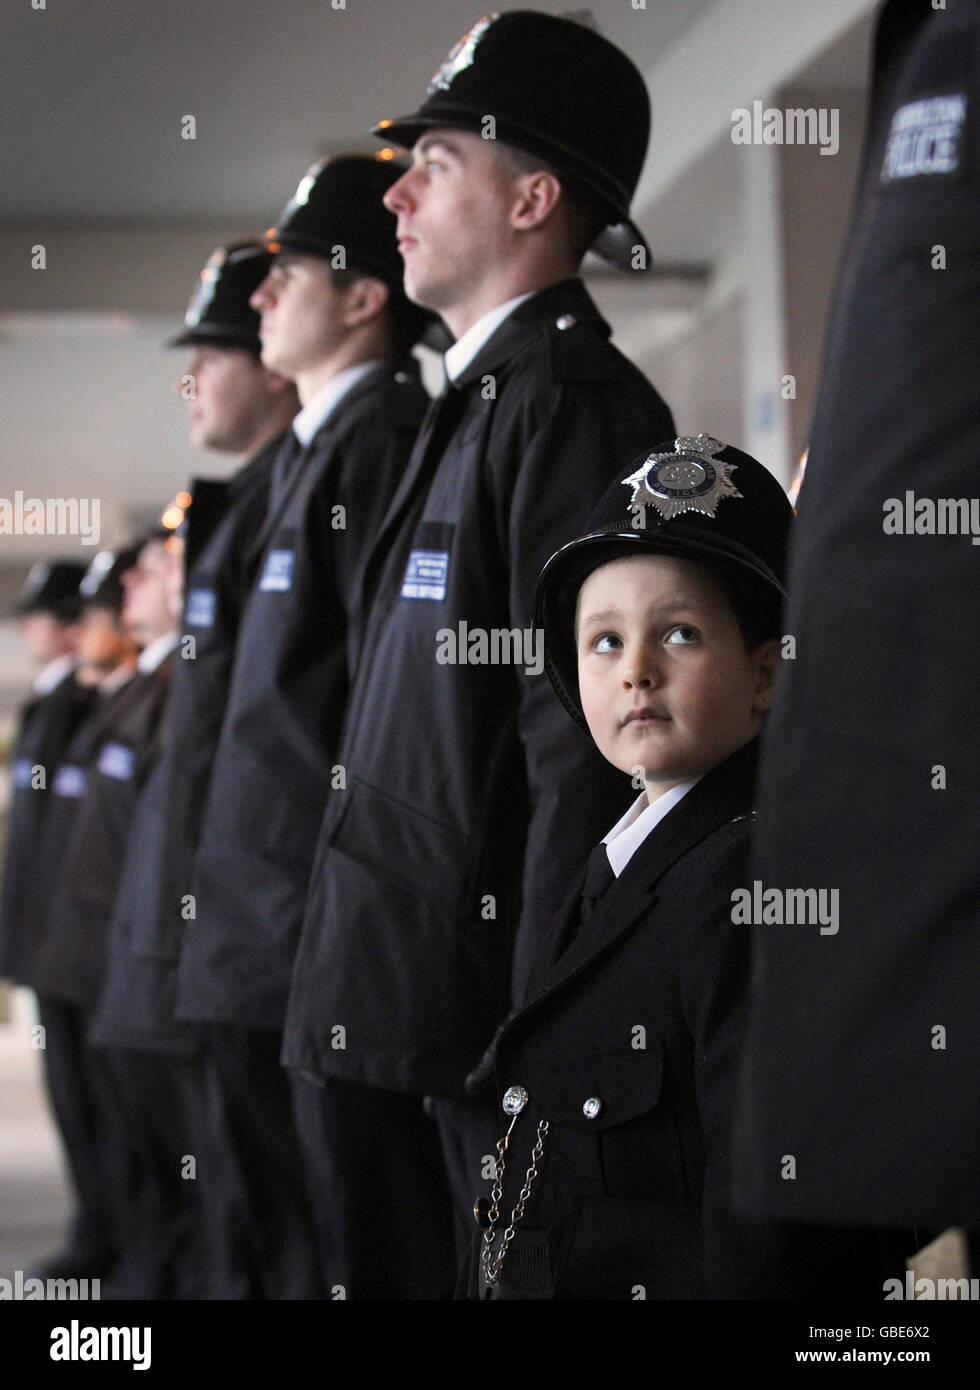 Six year-old Oscar (bottom right) from north London joins a police parade at Hendon Police training college. Stock Photo